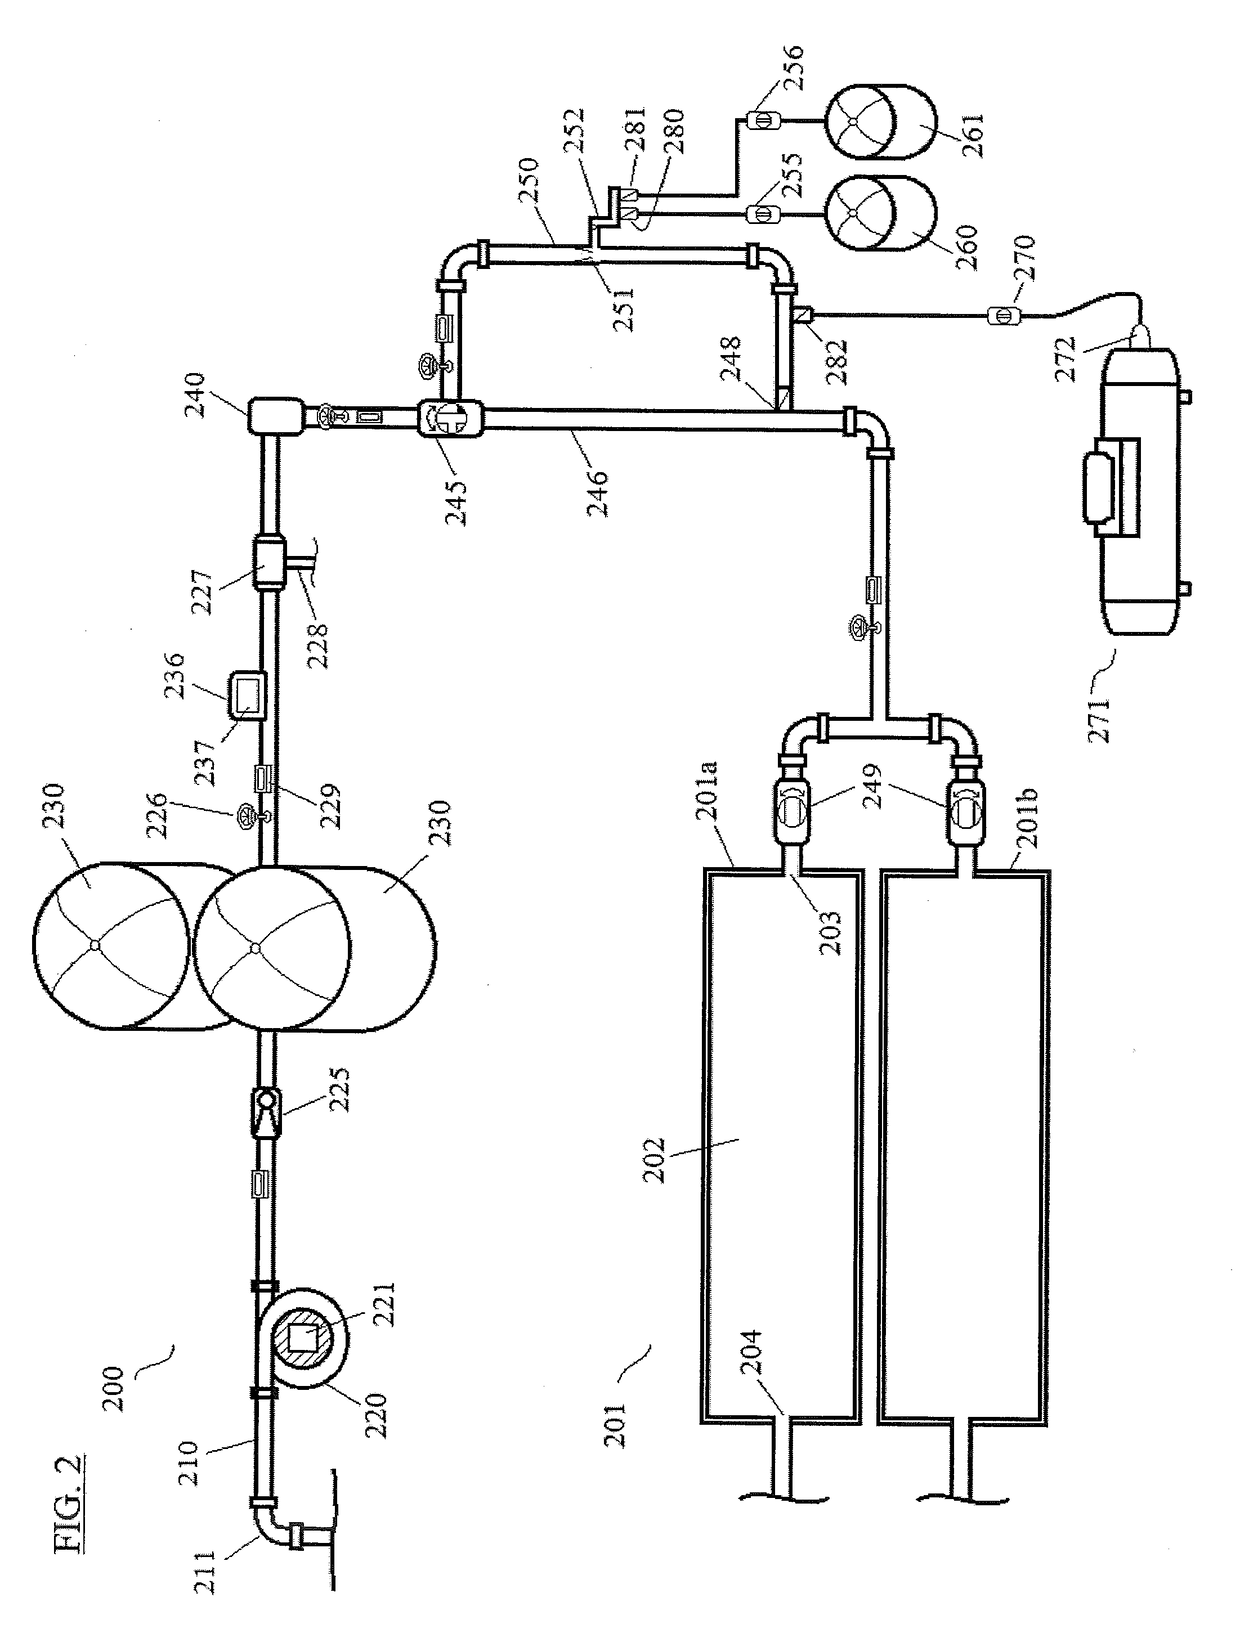 Systems And Methods for Filling and Flushing Animal Footbaths